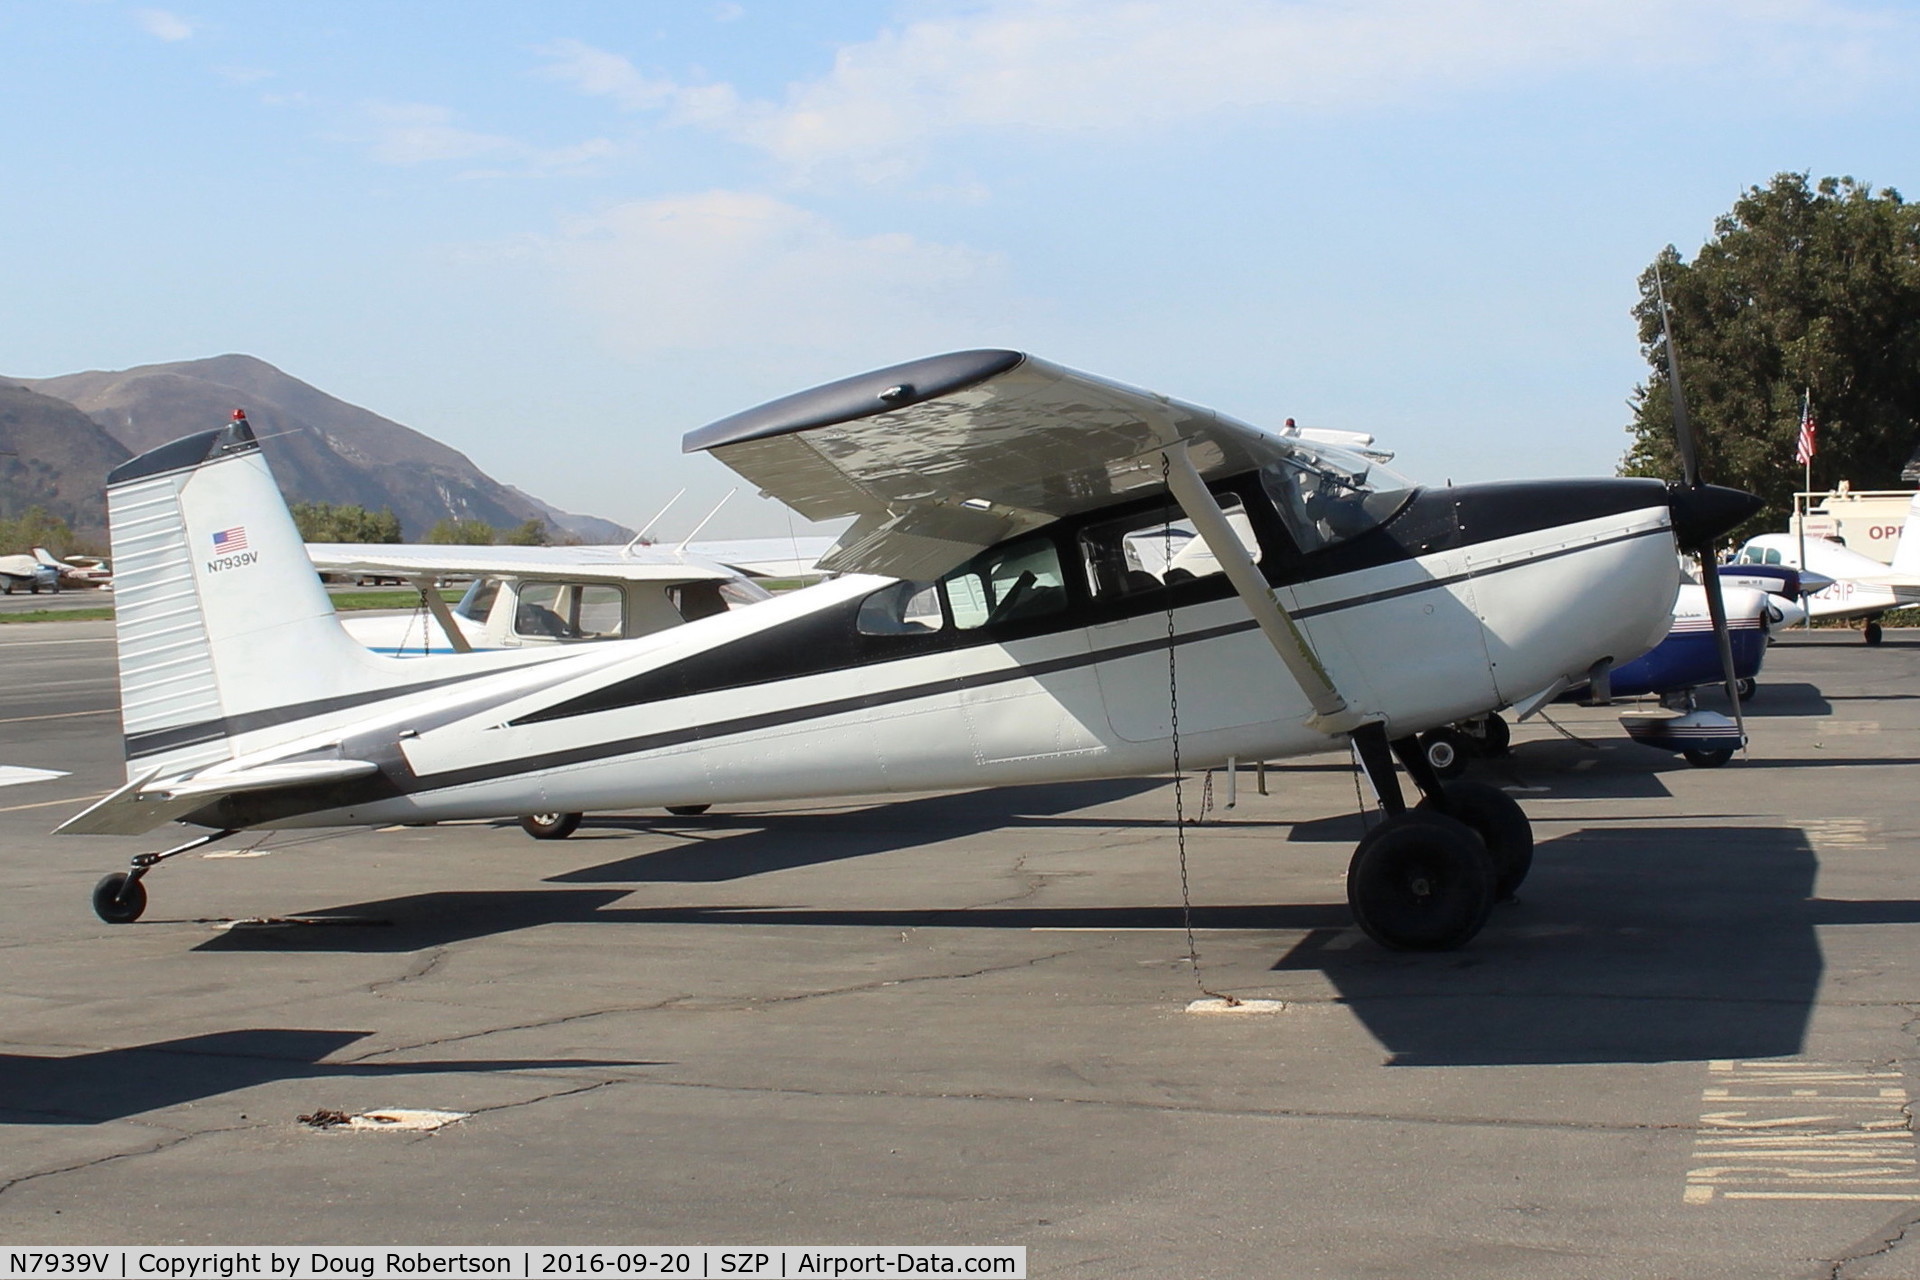 N7939V, 1967 Cessna 180H Skywagon C/N 18051839, 1967 Cessna 180H, Continental O-470-S 230 Hp. Introduced as 180 in 1953, would not be called Skywagon until 1969 production.